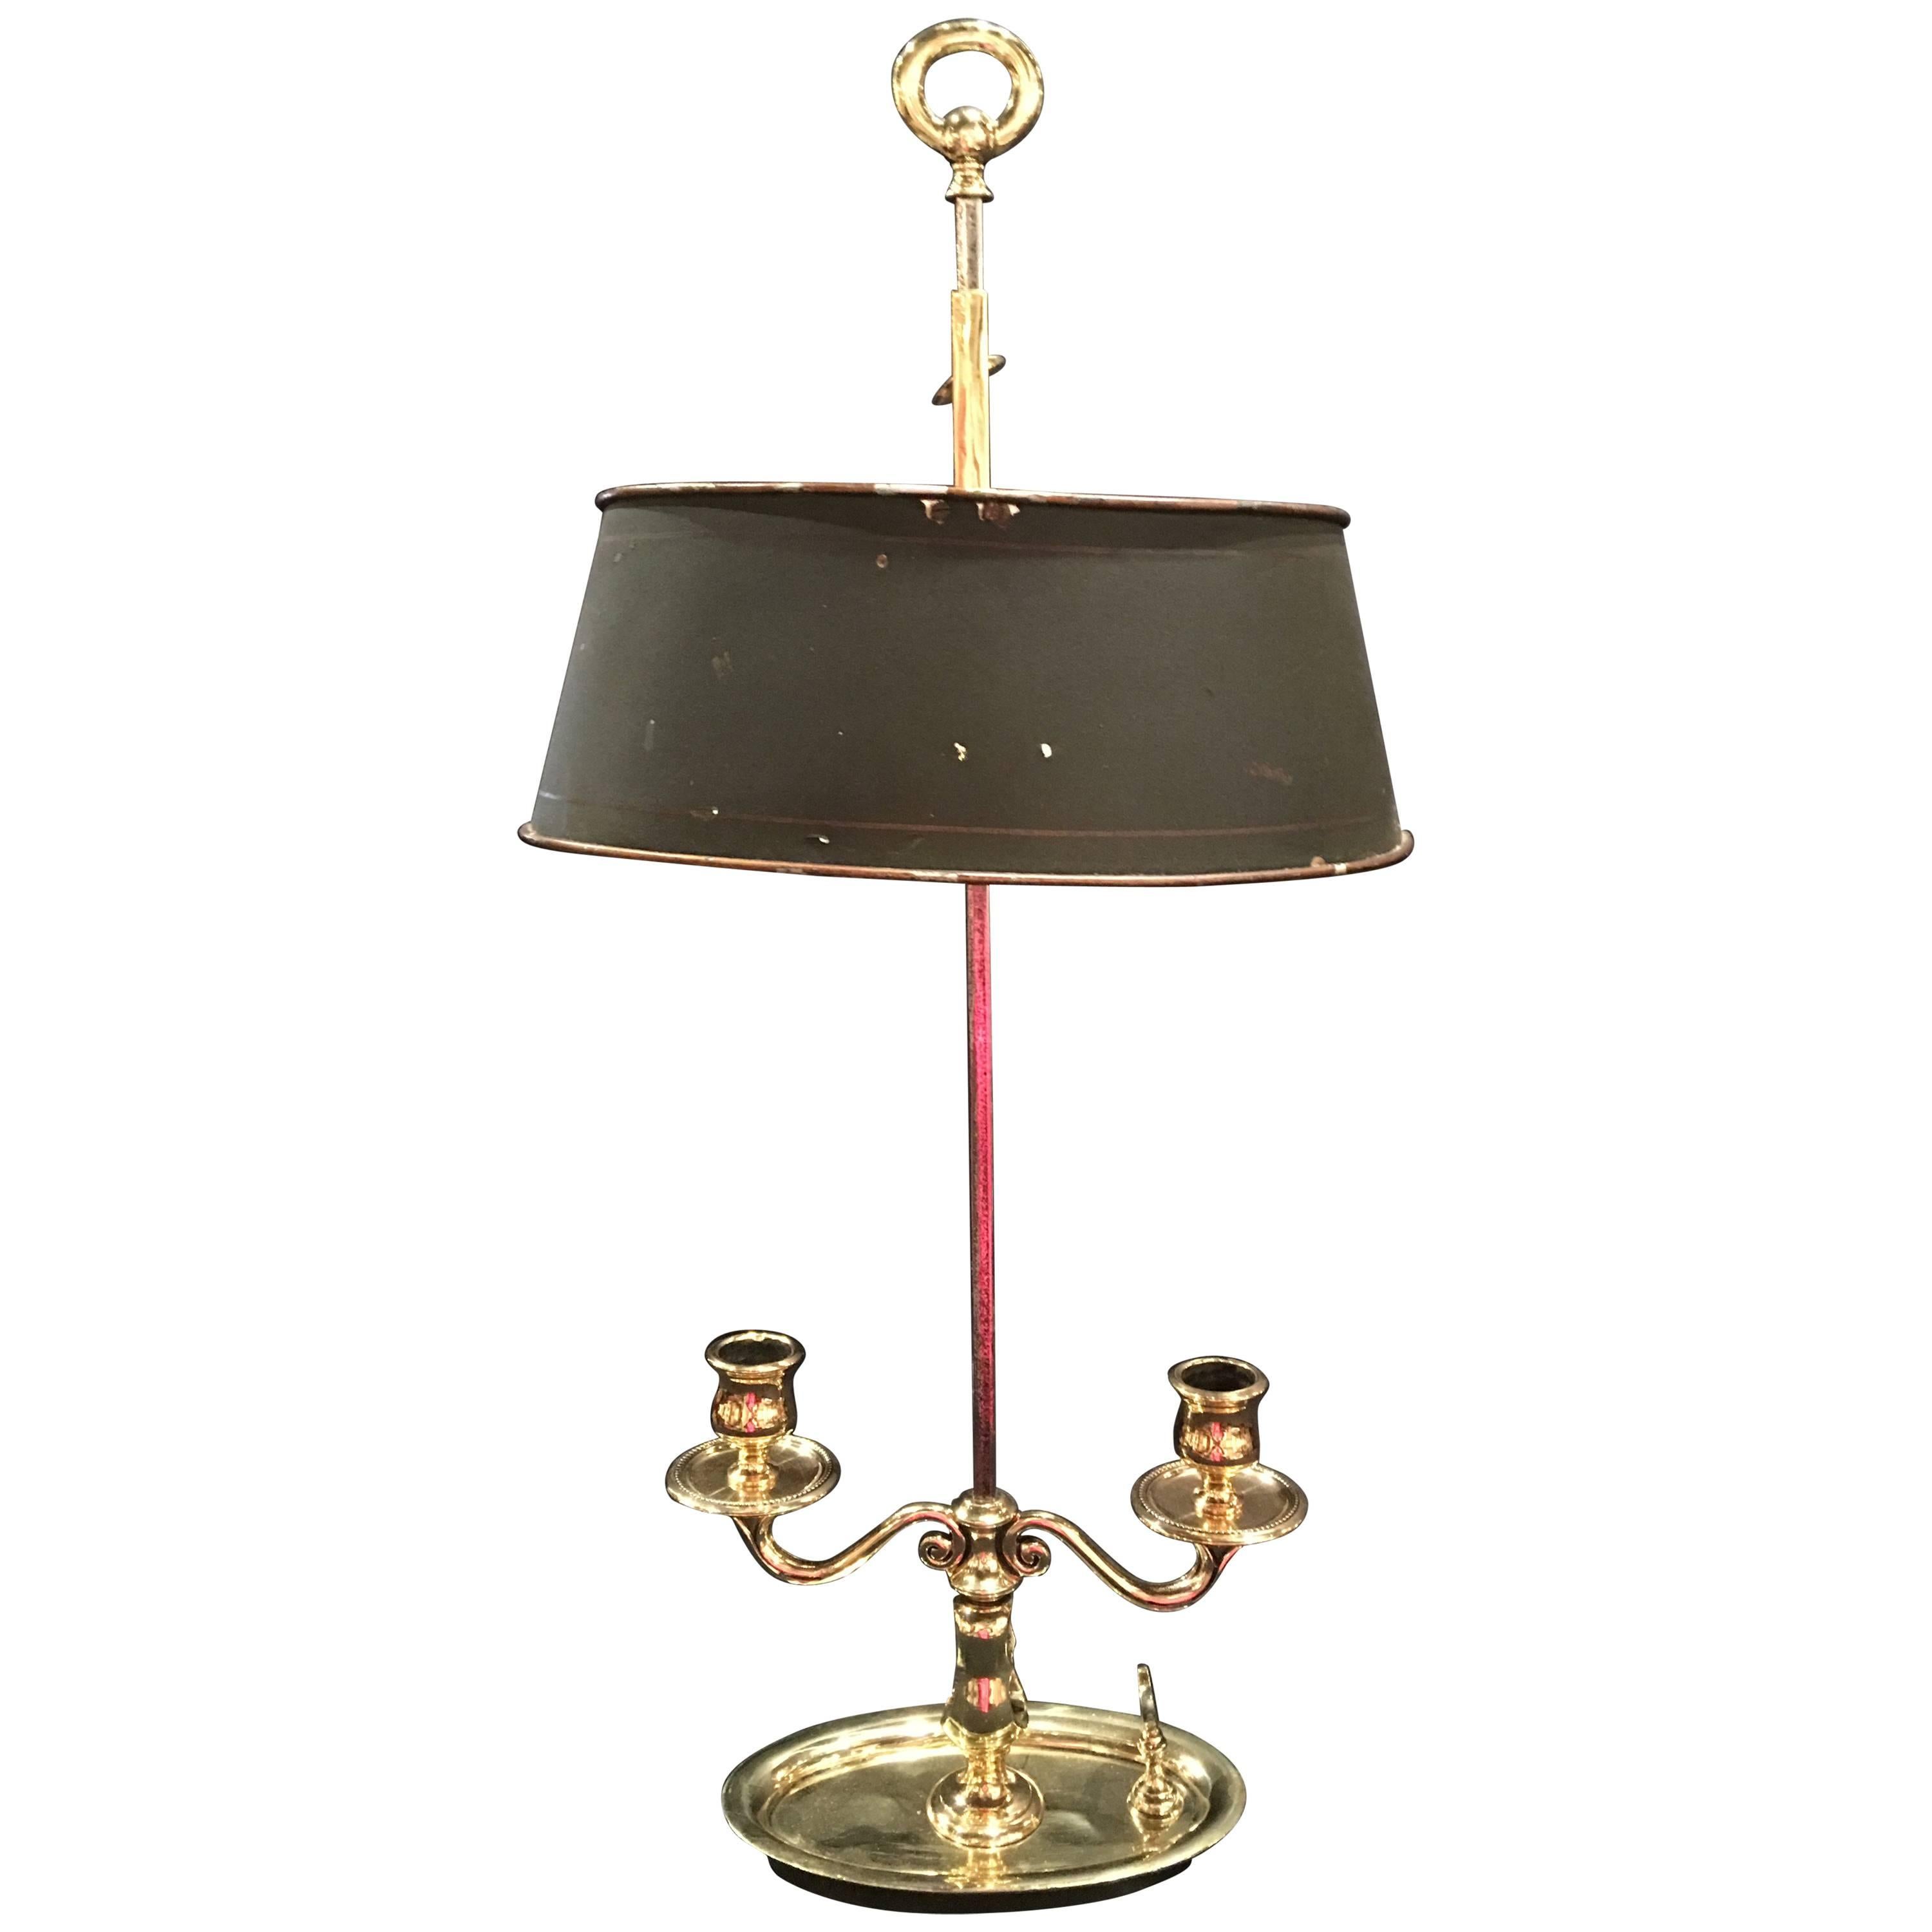 French Bouillotte Two-Candle Lamp Polished Brass with Metal Shade, 19th Century